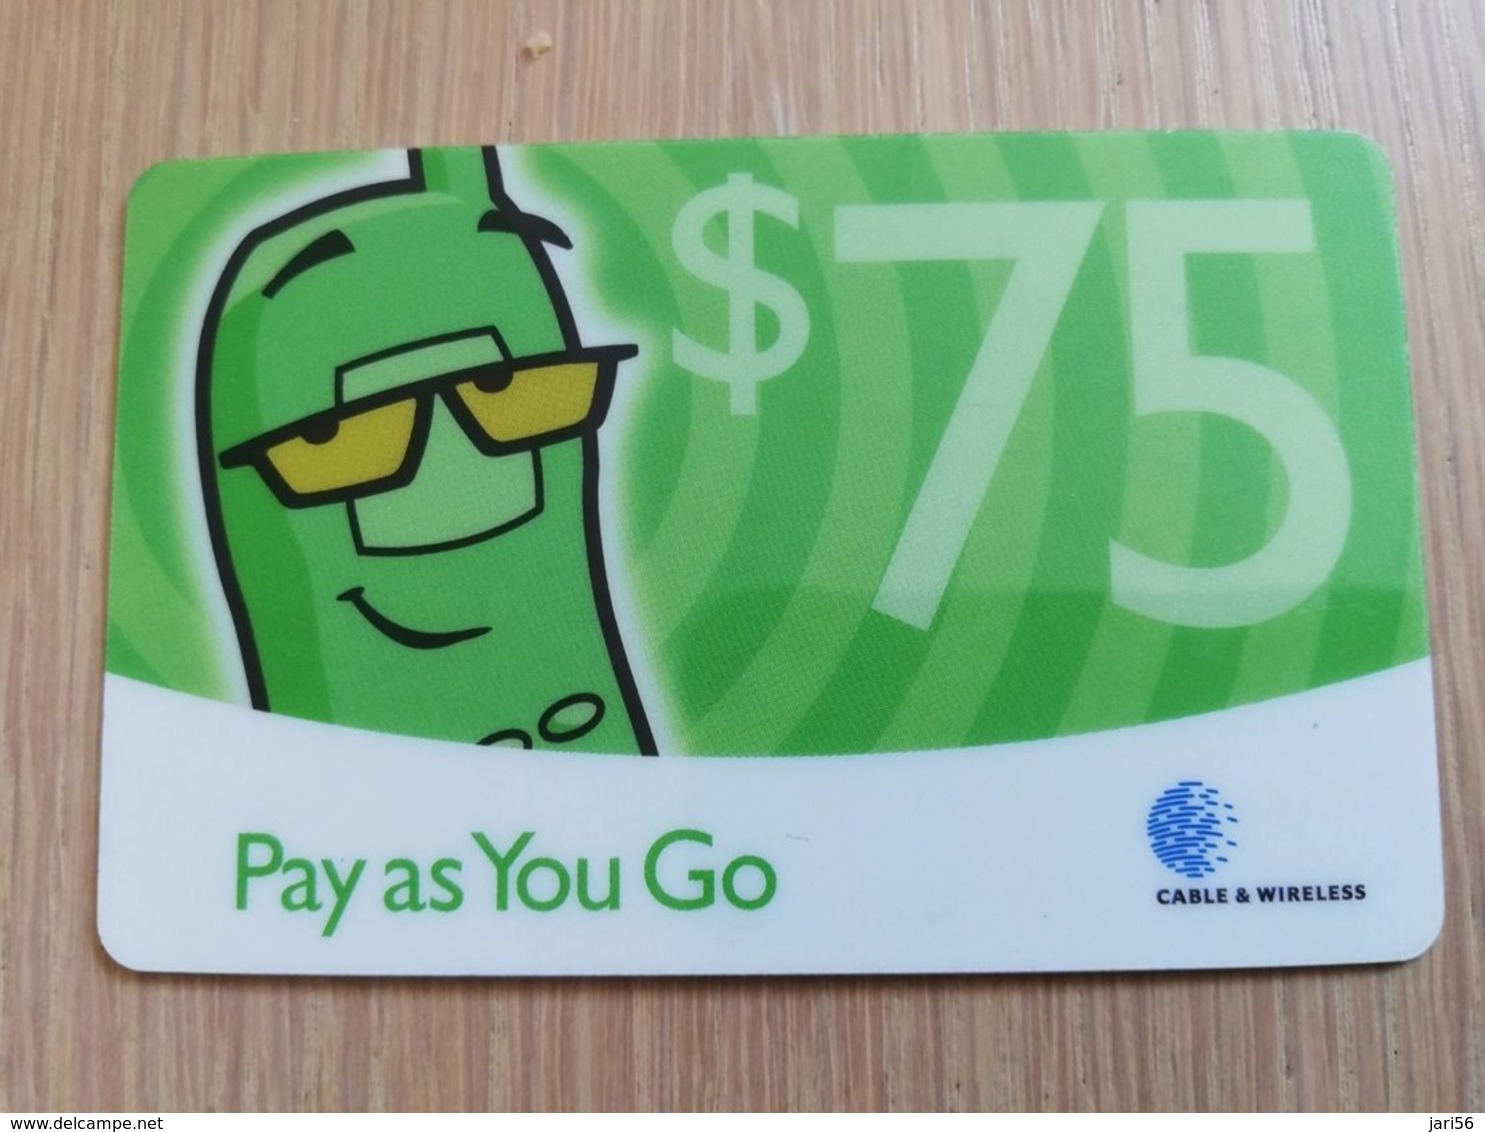 ST VINCENT & GRENADINES   $ 75 PAY AS YOU GO  GREEN  THICK  Prepaid   Fine Used  Card  **2165 ** - St. Vincent & Die Grenadinen